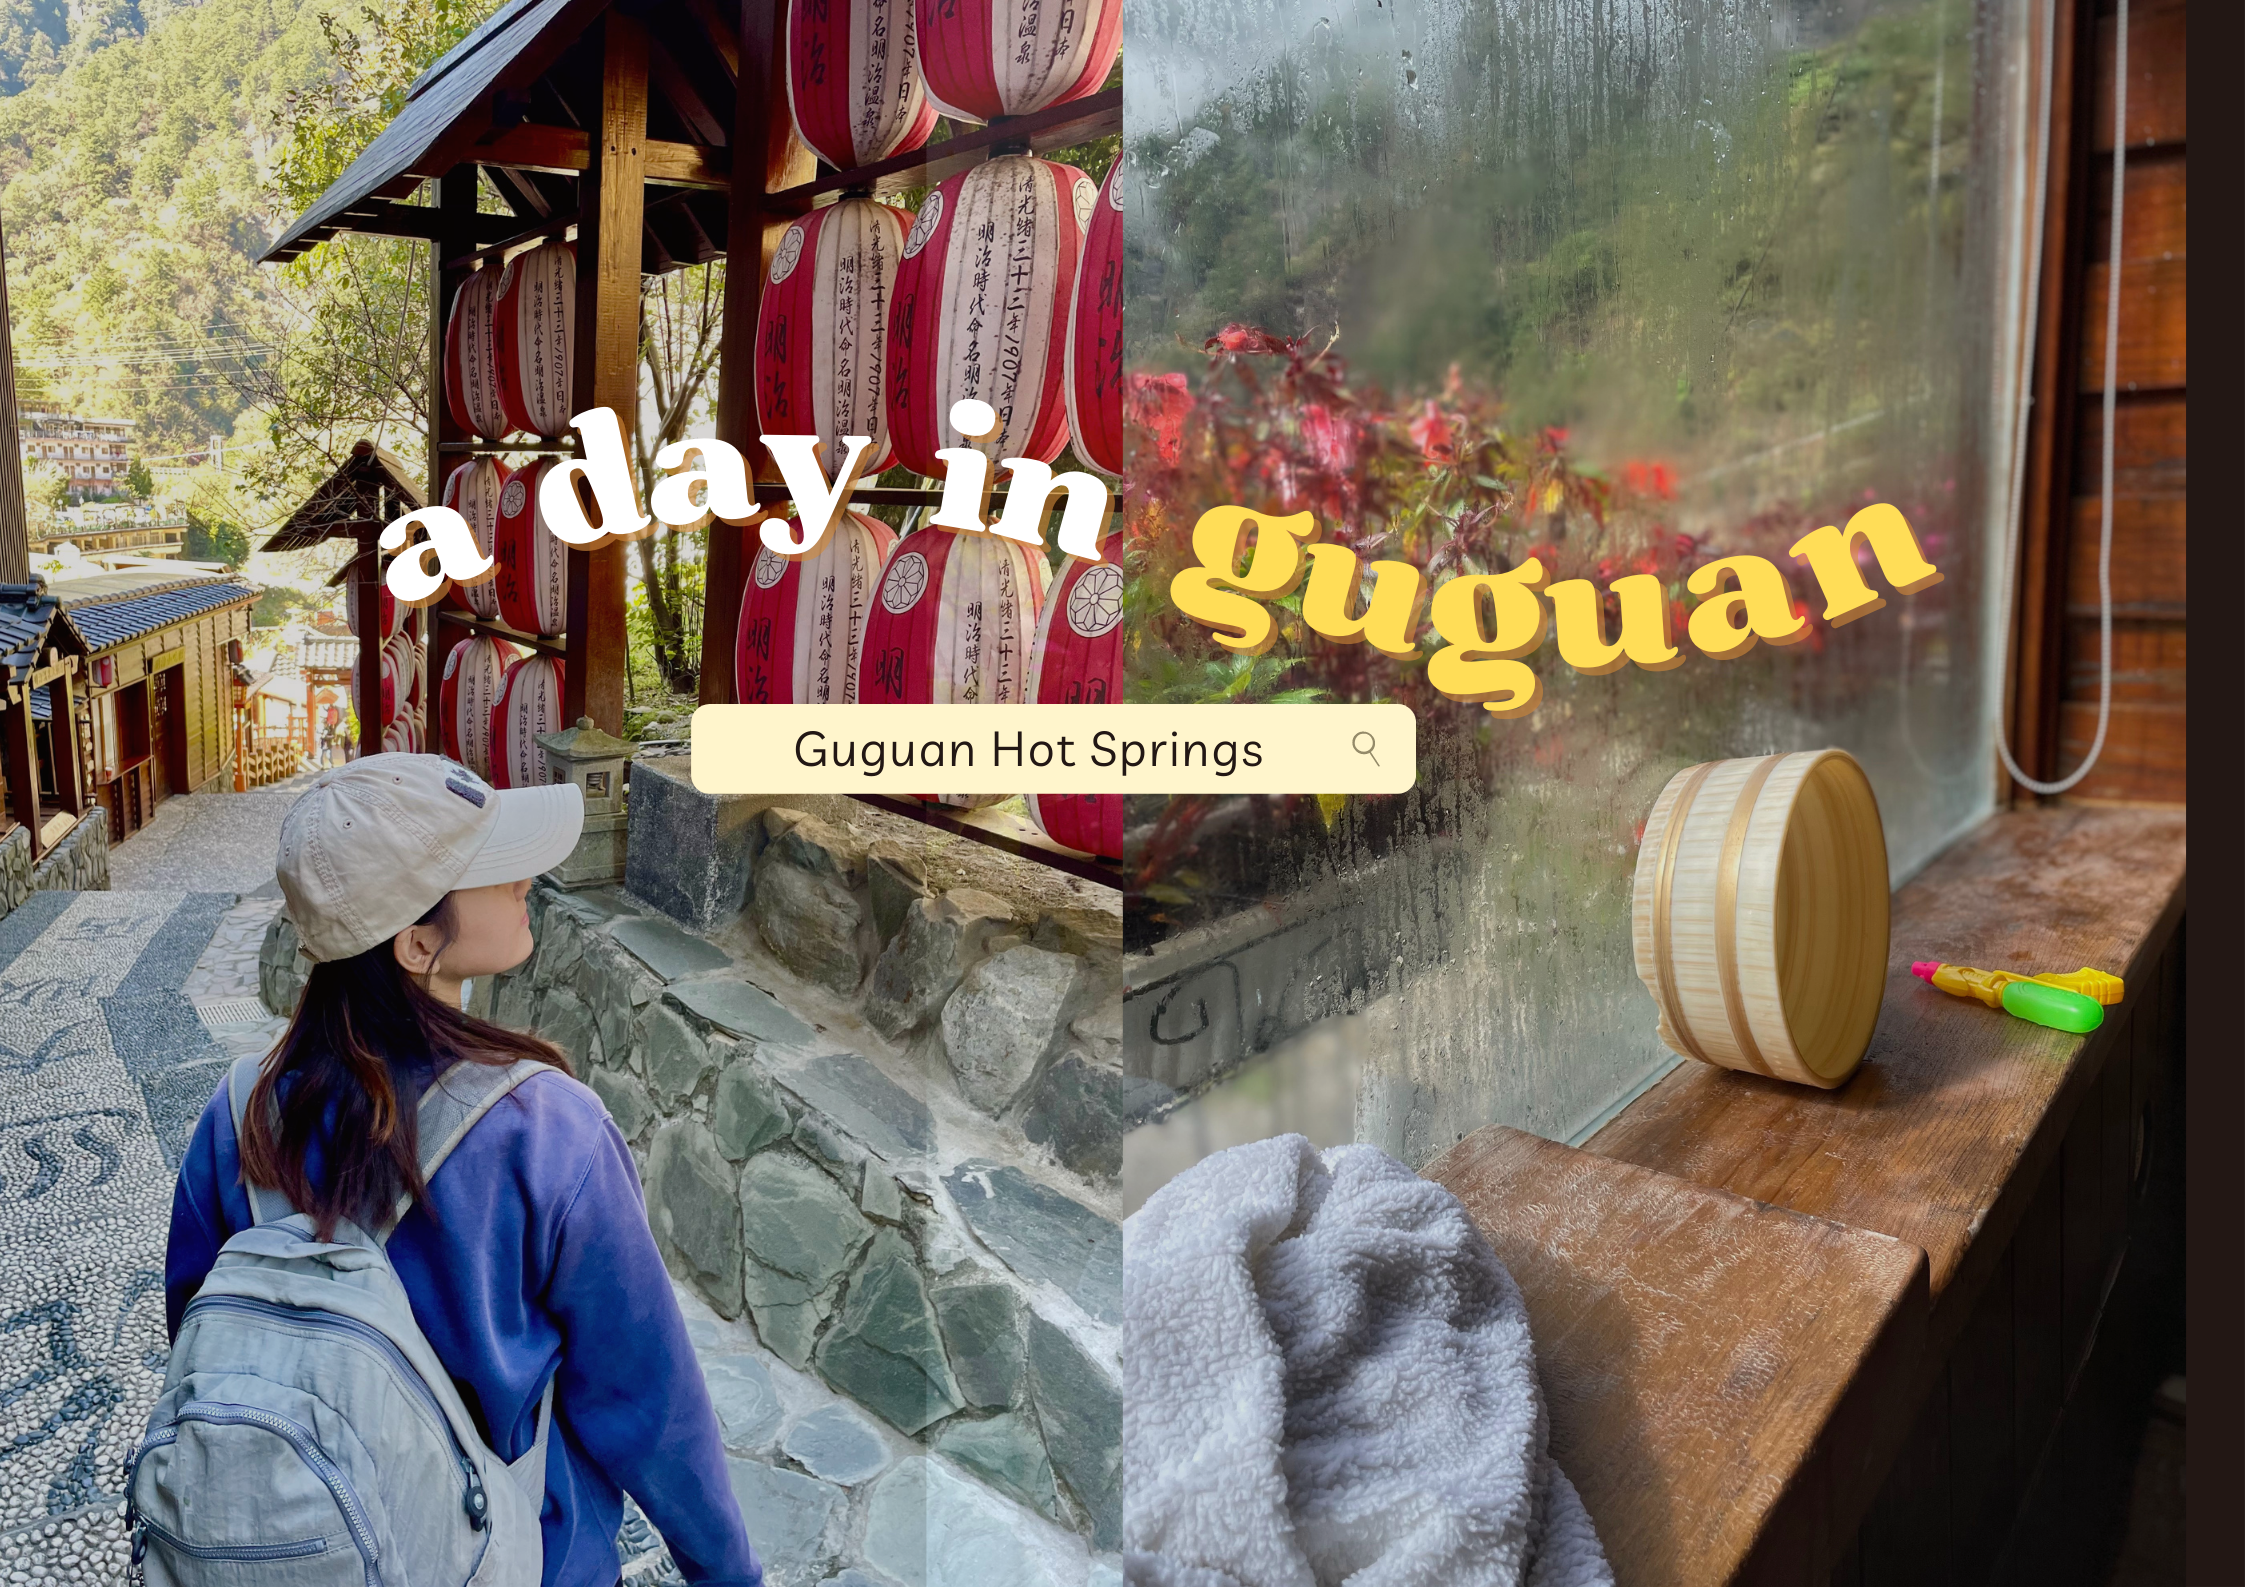 The Ultimate Guide to Hot Springs in Guguan, Taichung